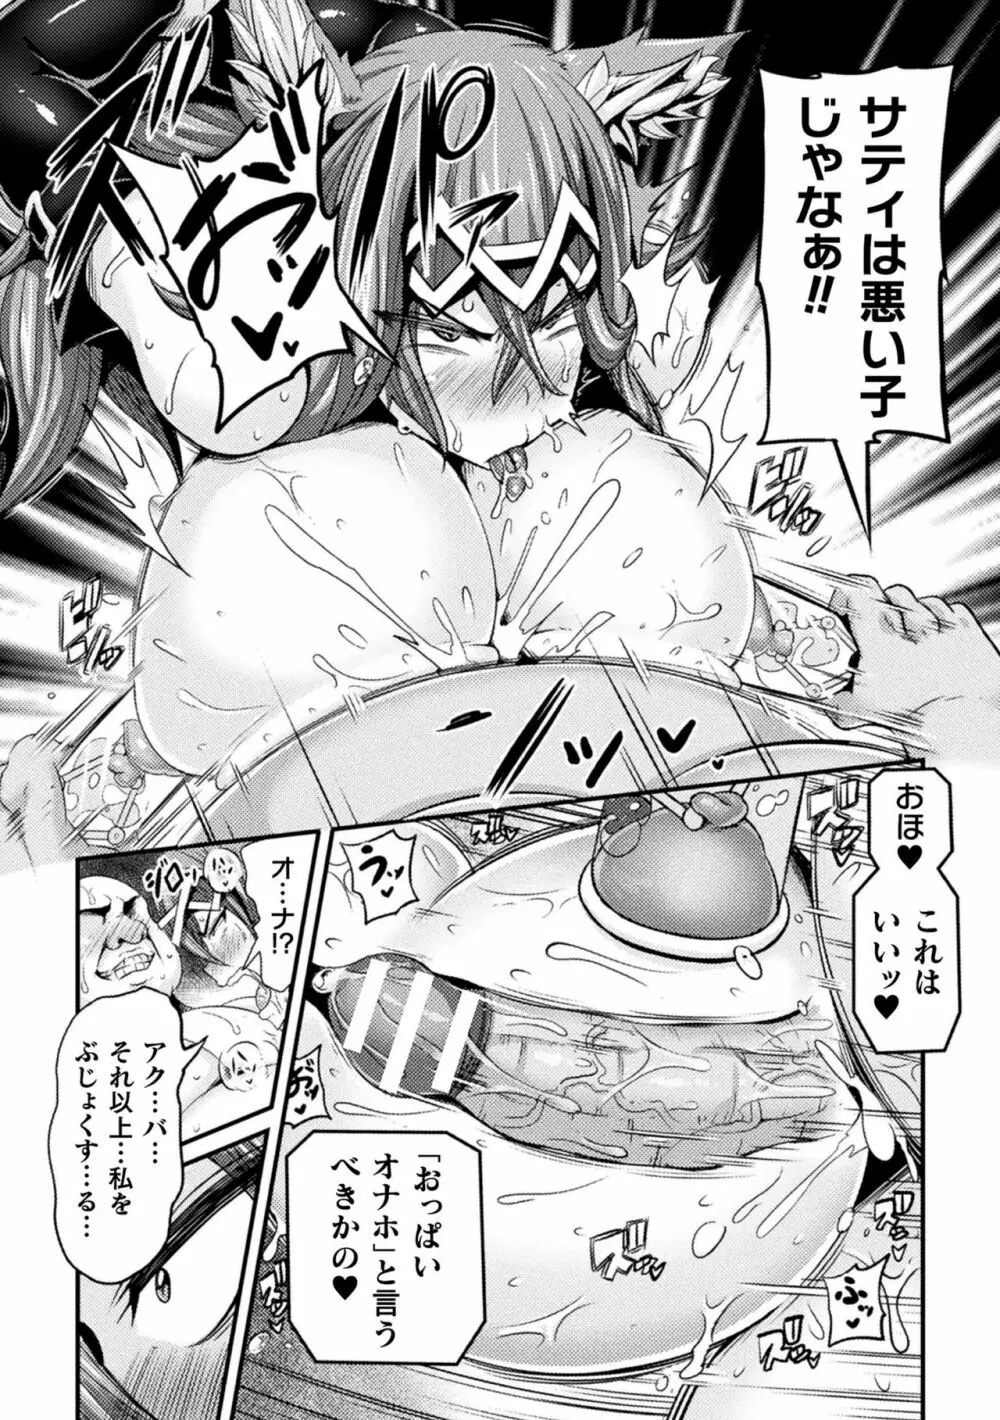 LOVE METER〜寝取られた相棒〜 #2 Page.7